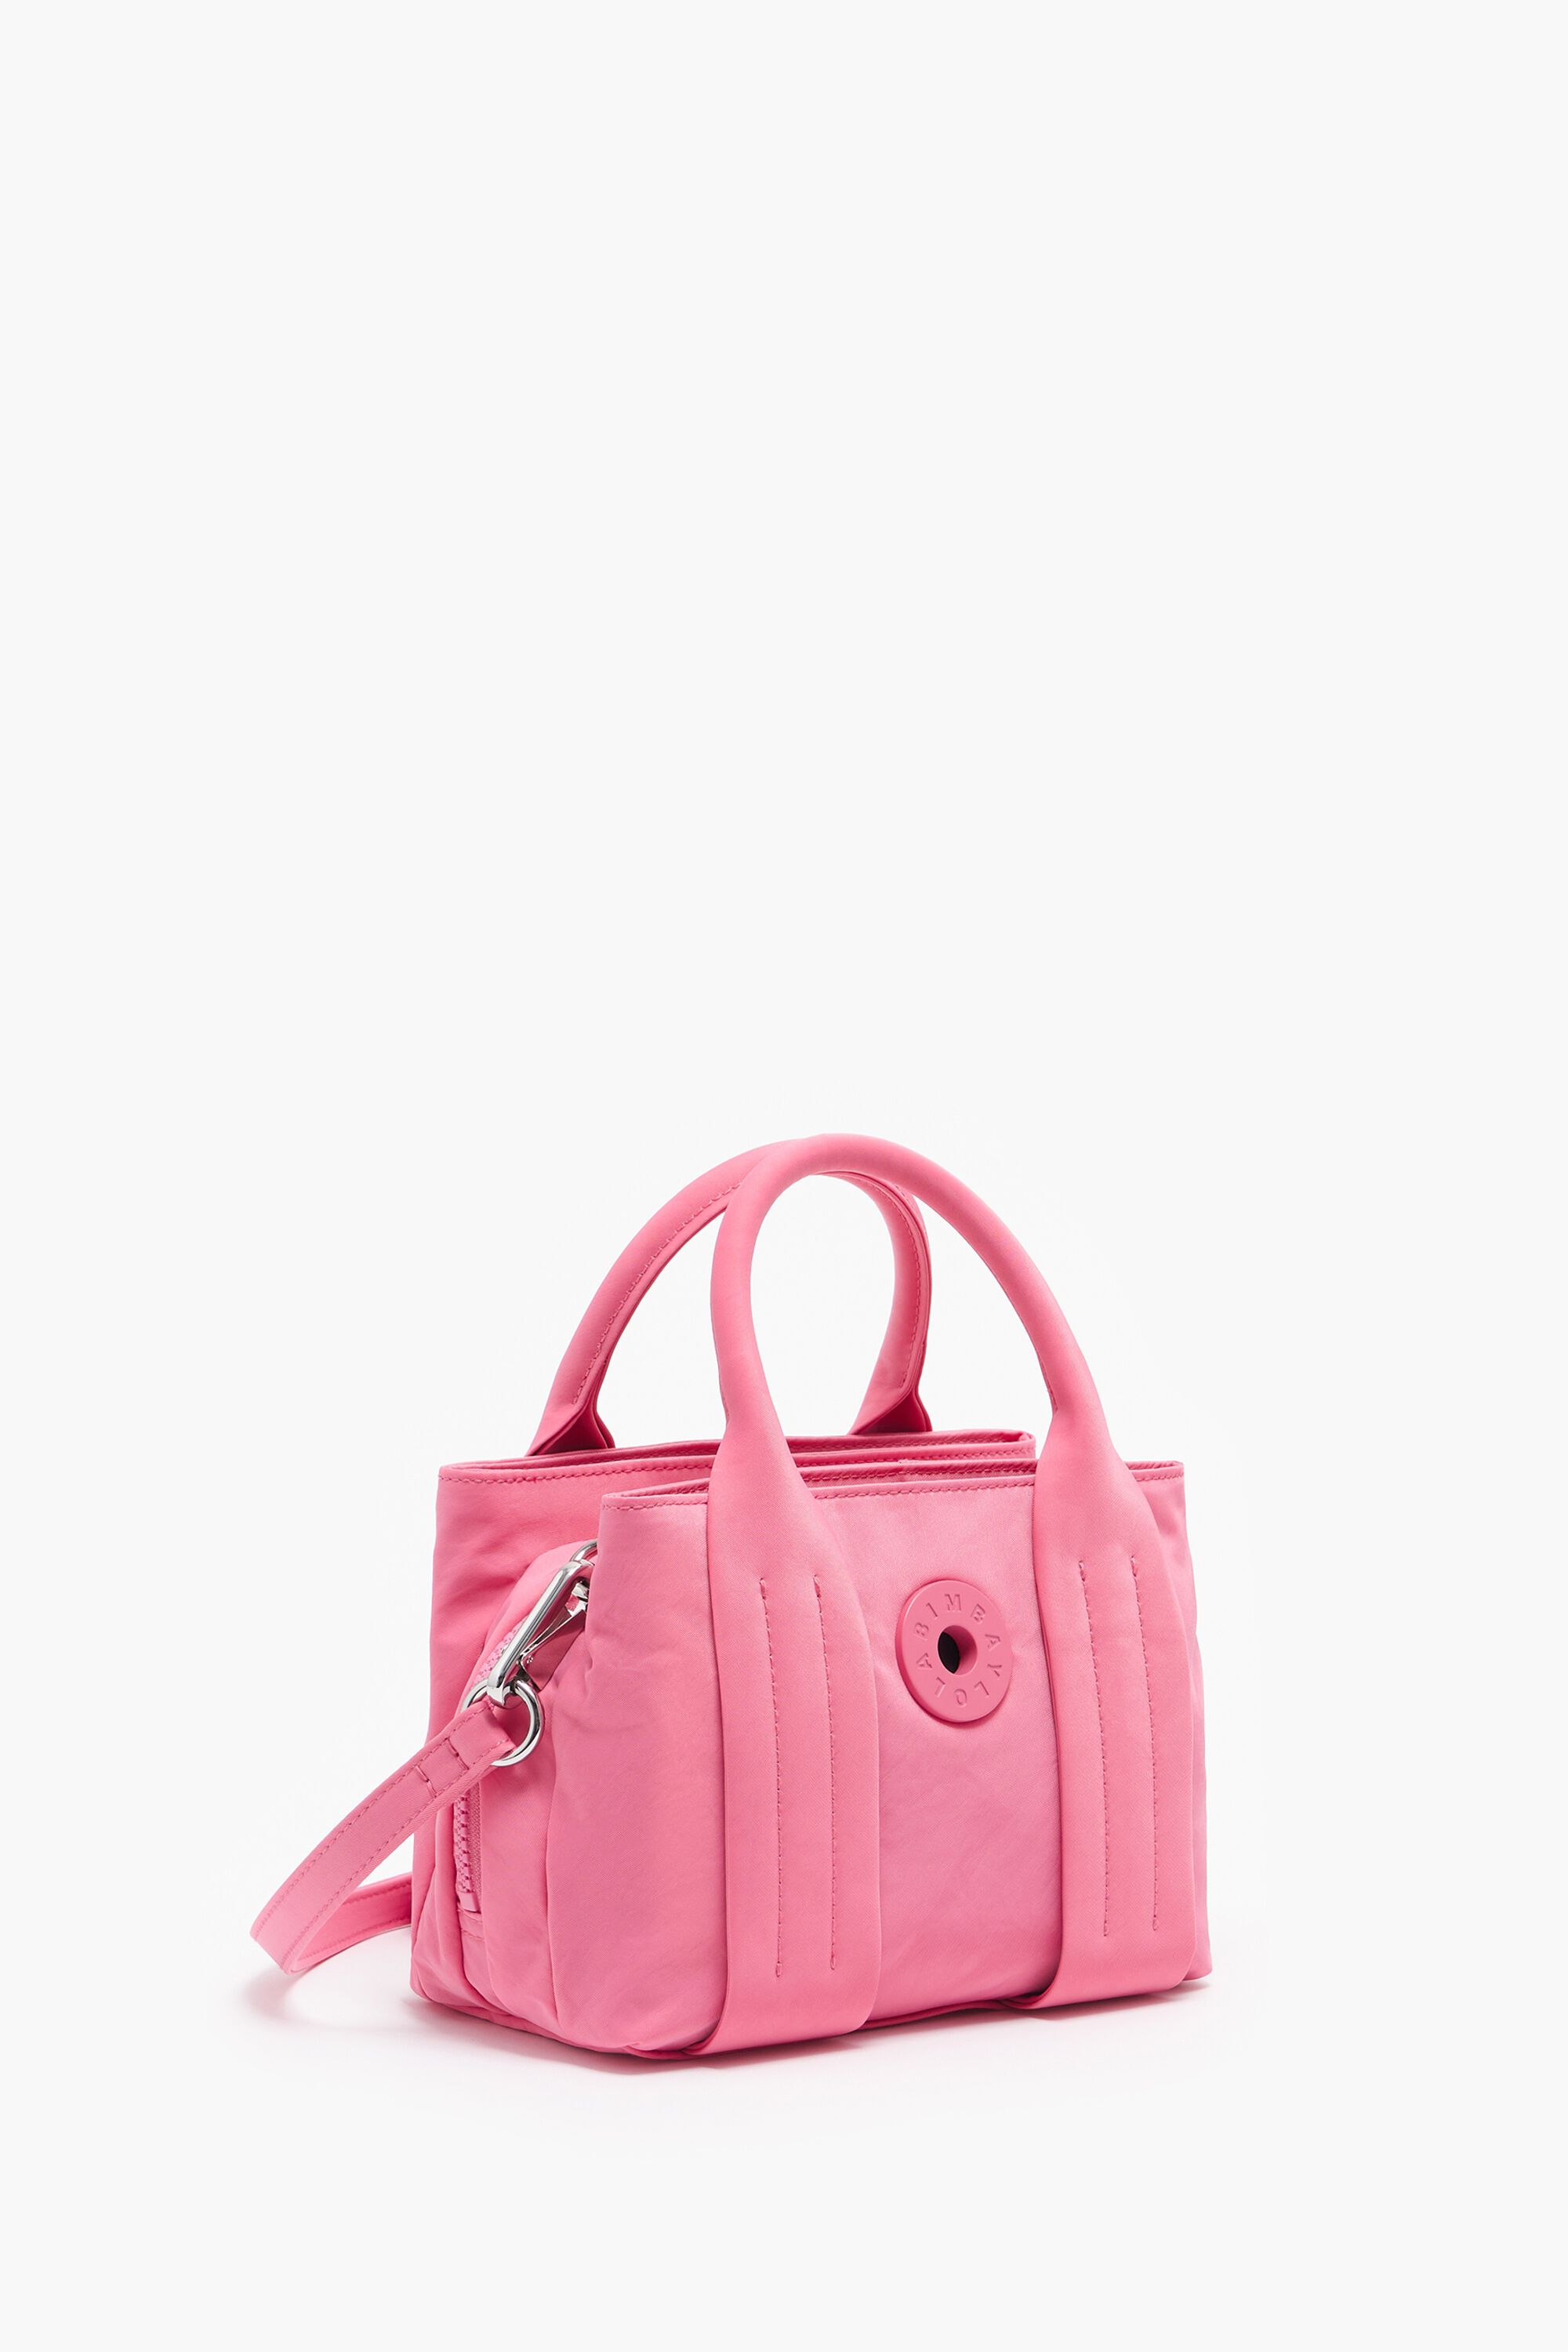 PINK LV WOVEN TOTE – Briesly's Boutique